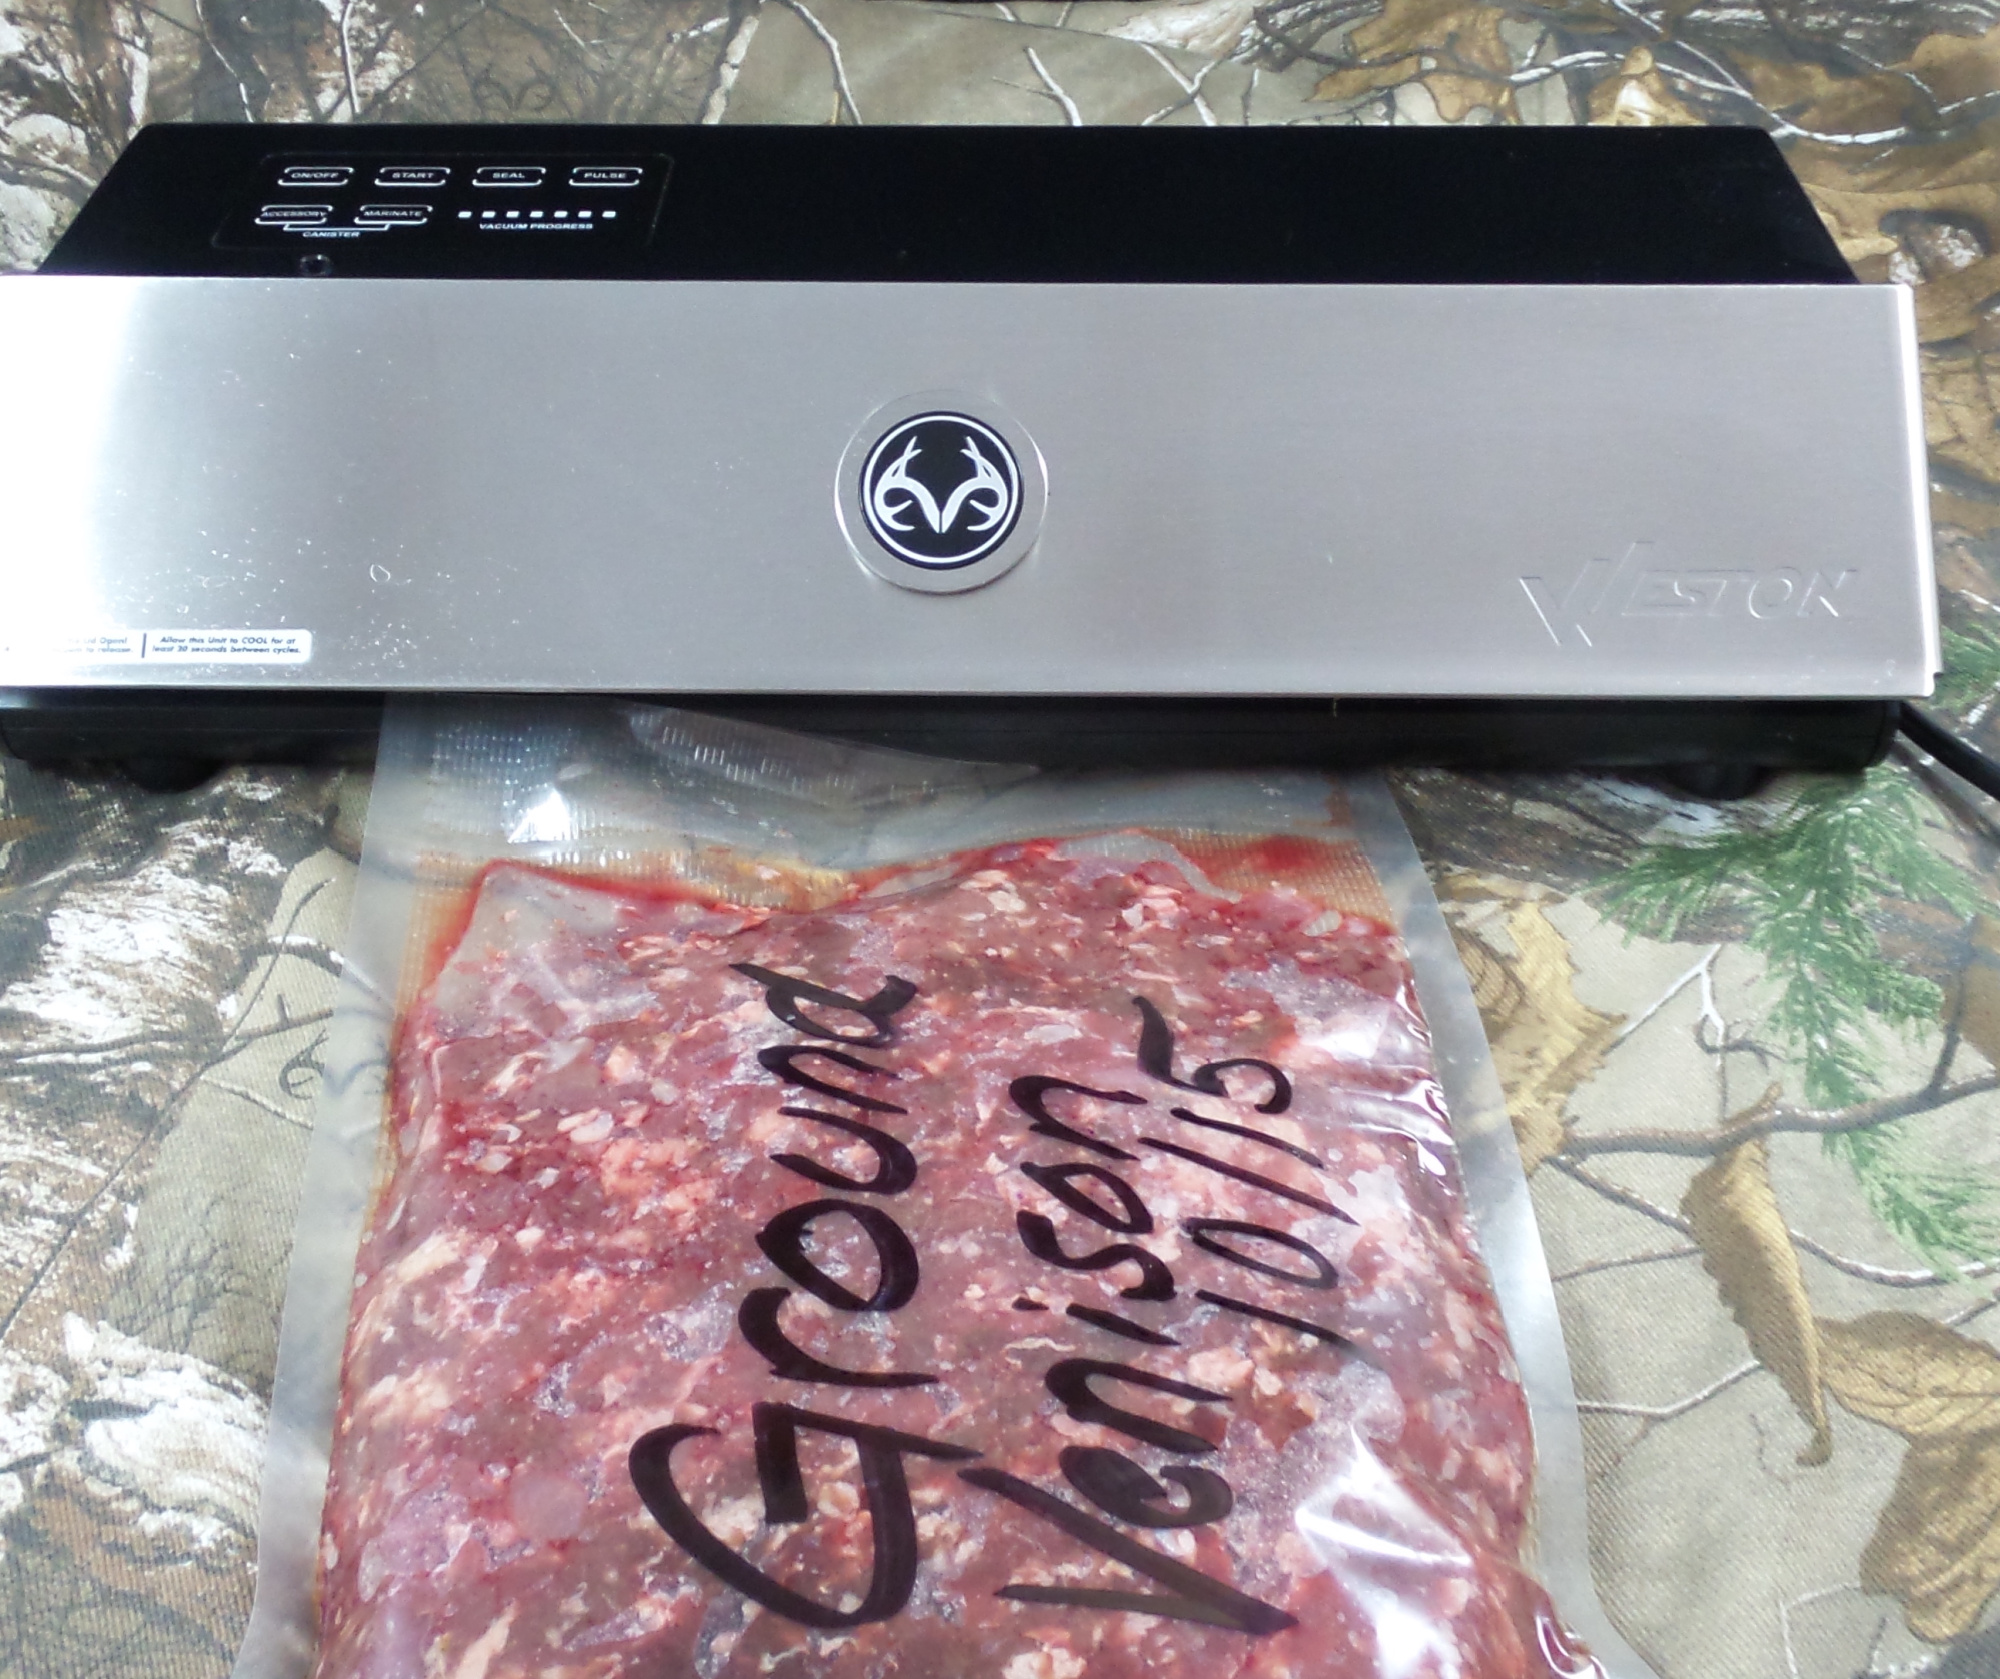 An external suction vacuum sealer makes a flat package of ground venison.